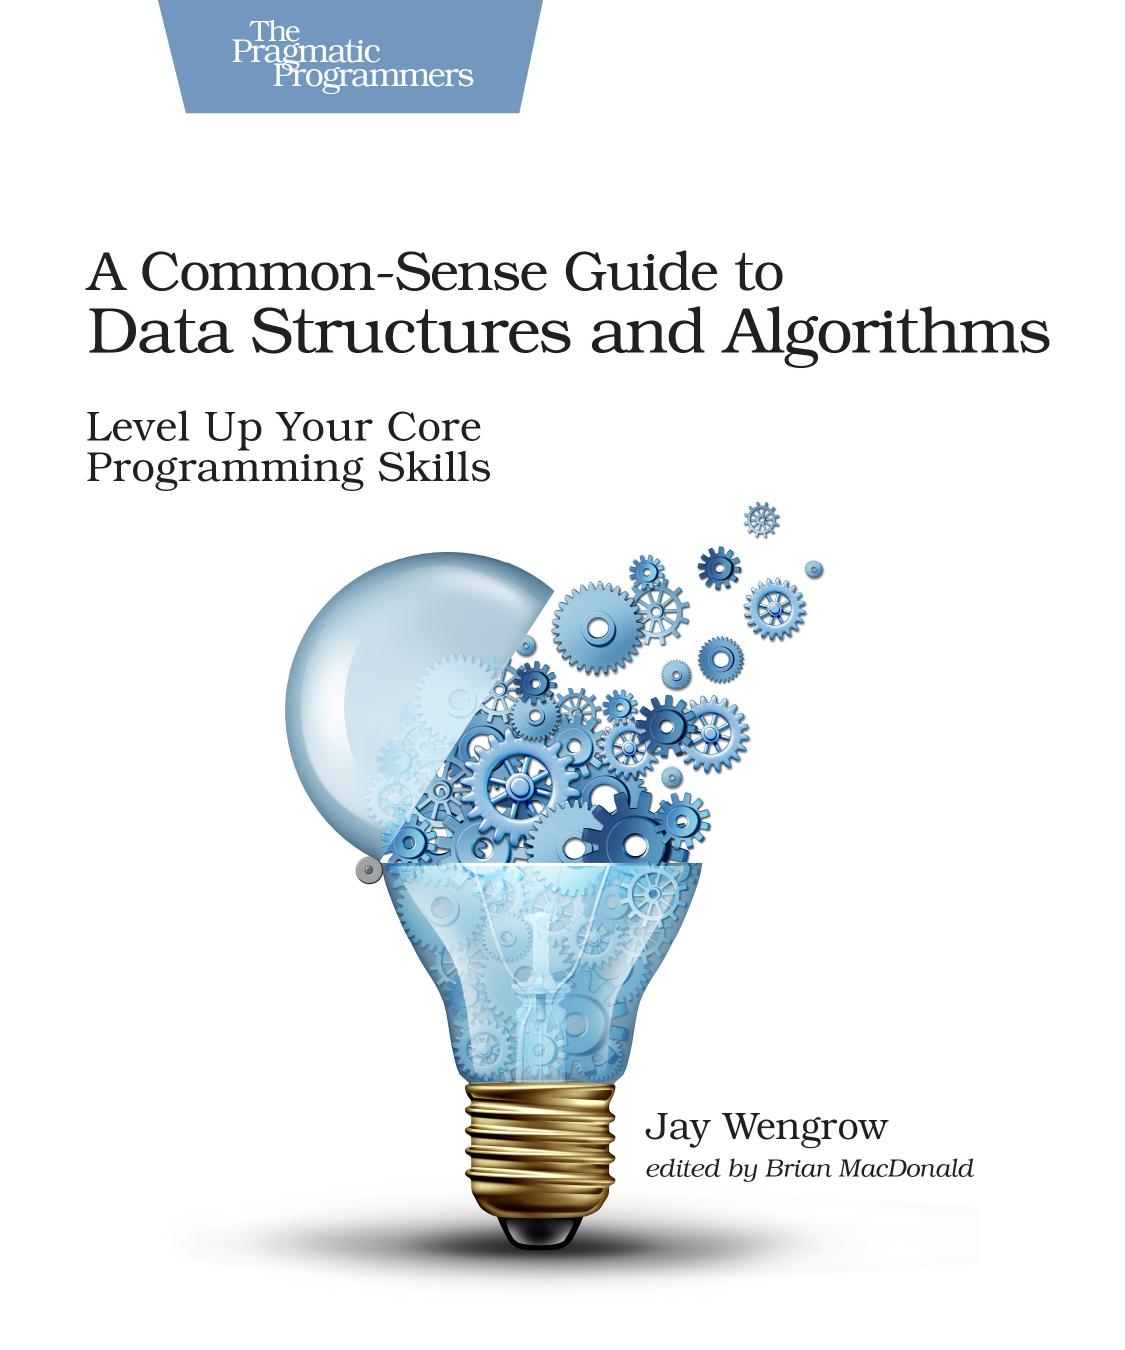 A Common-Sense Guide to Data Structures and Algorithms: Level Up Your Core Programming Skills by Jay Wengrow